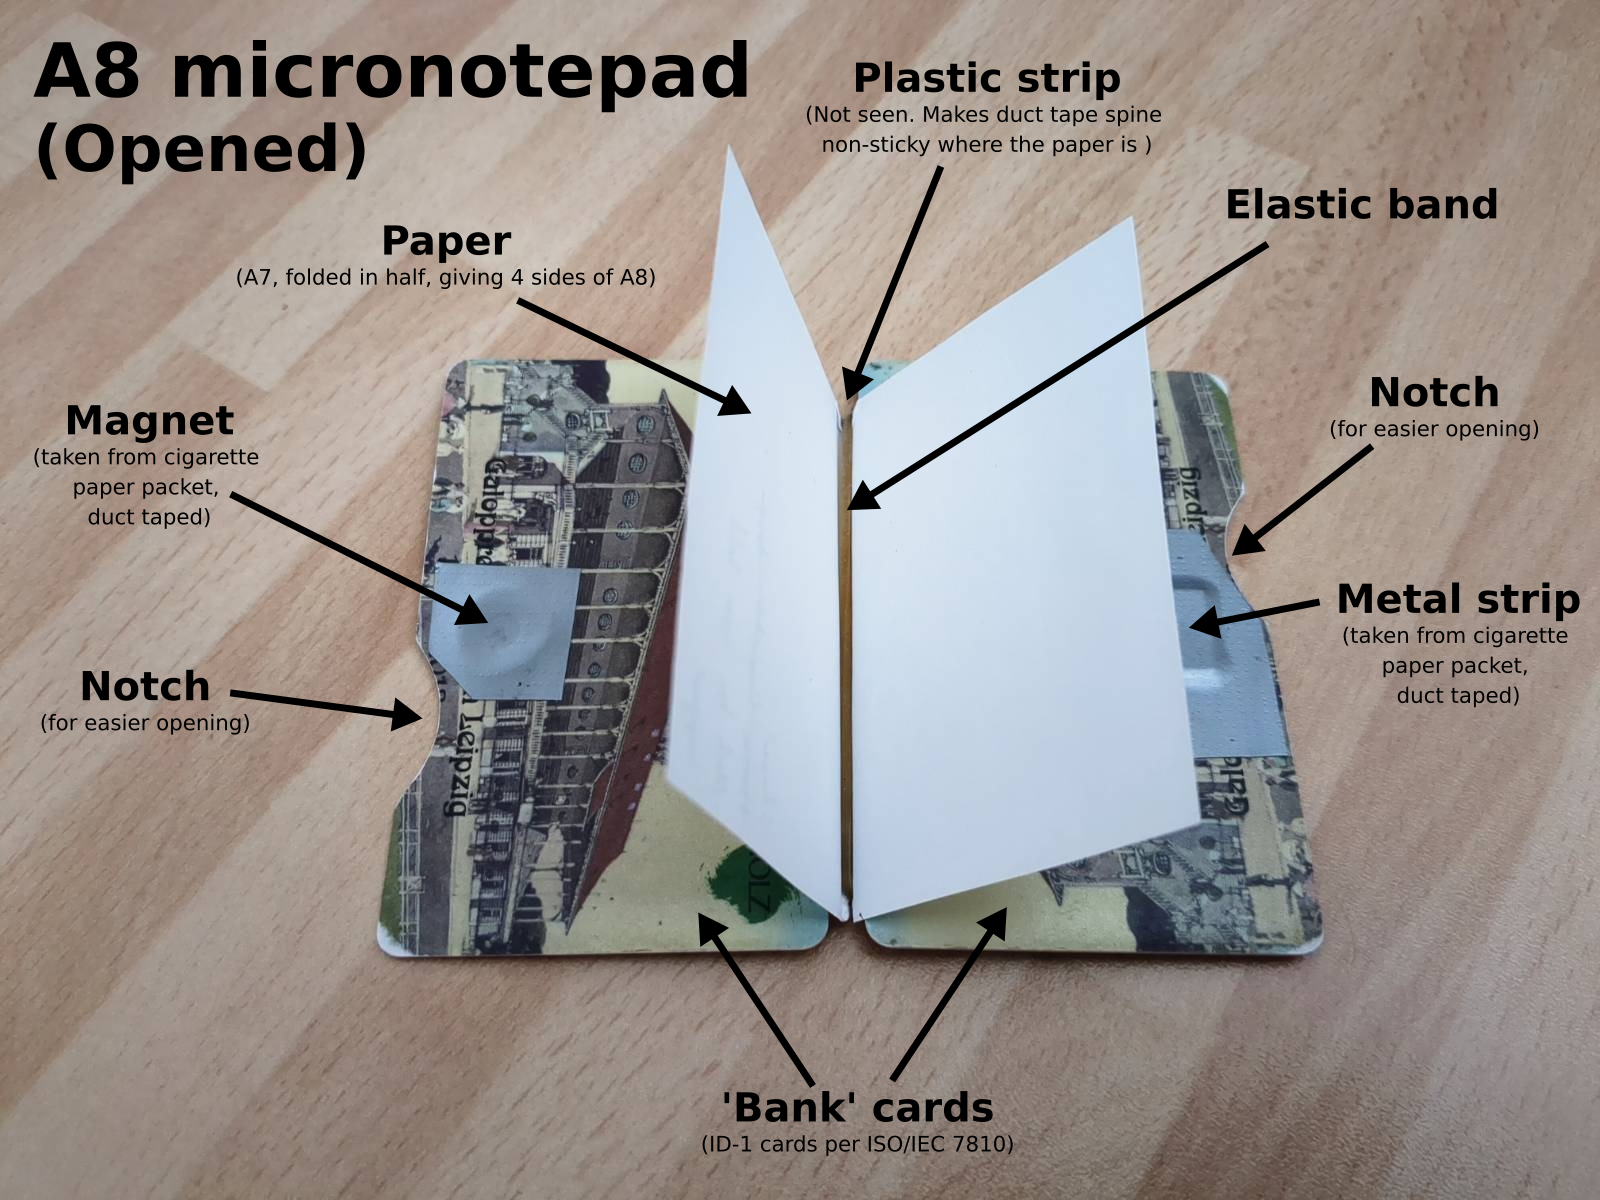 The notepad opened. A small piece, folded in half, rises upwards. The magnet and corresponding metal strip of the closing mechanism are visible in corresponding sides, masked with duct tape. The elastic band holding the paper to the notepad is visible vertically.